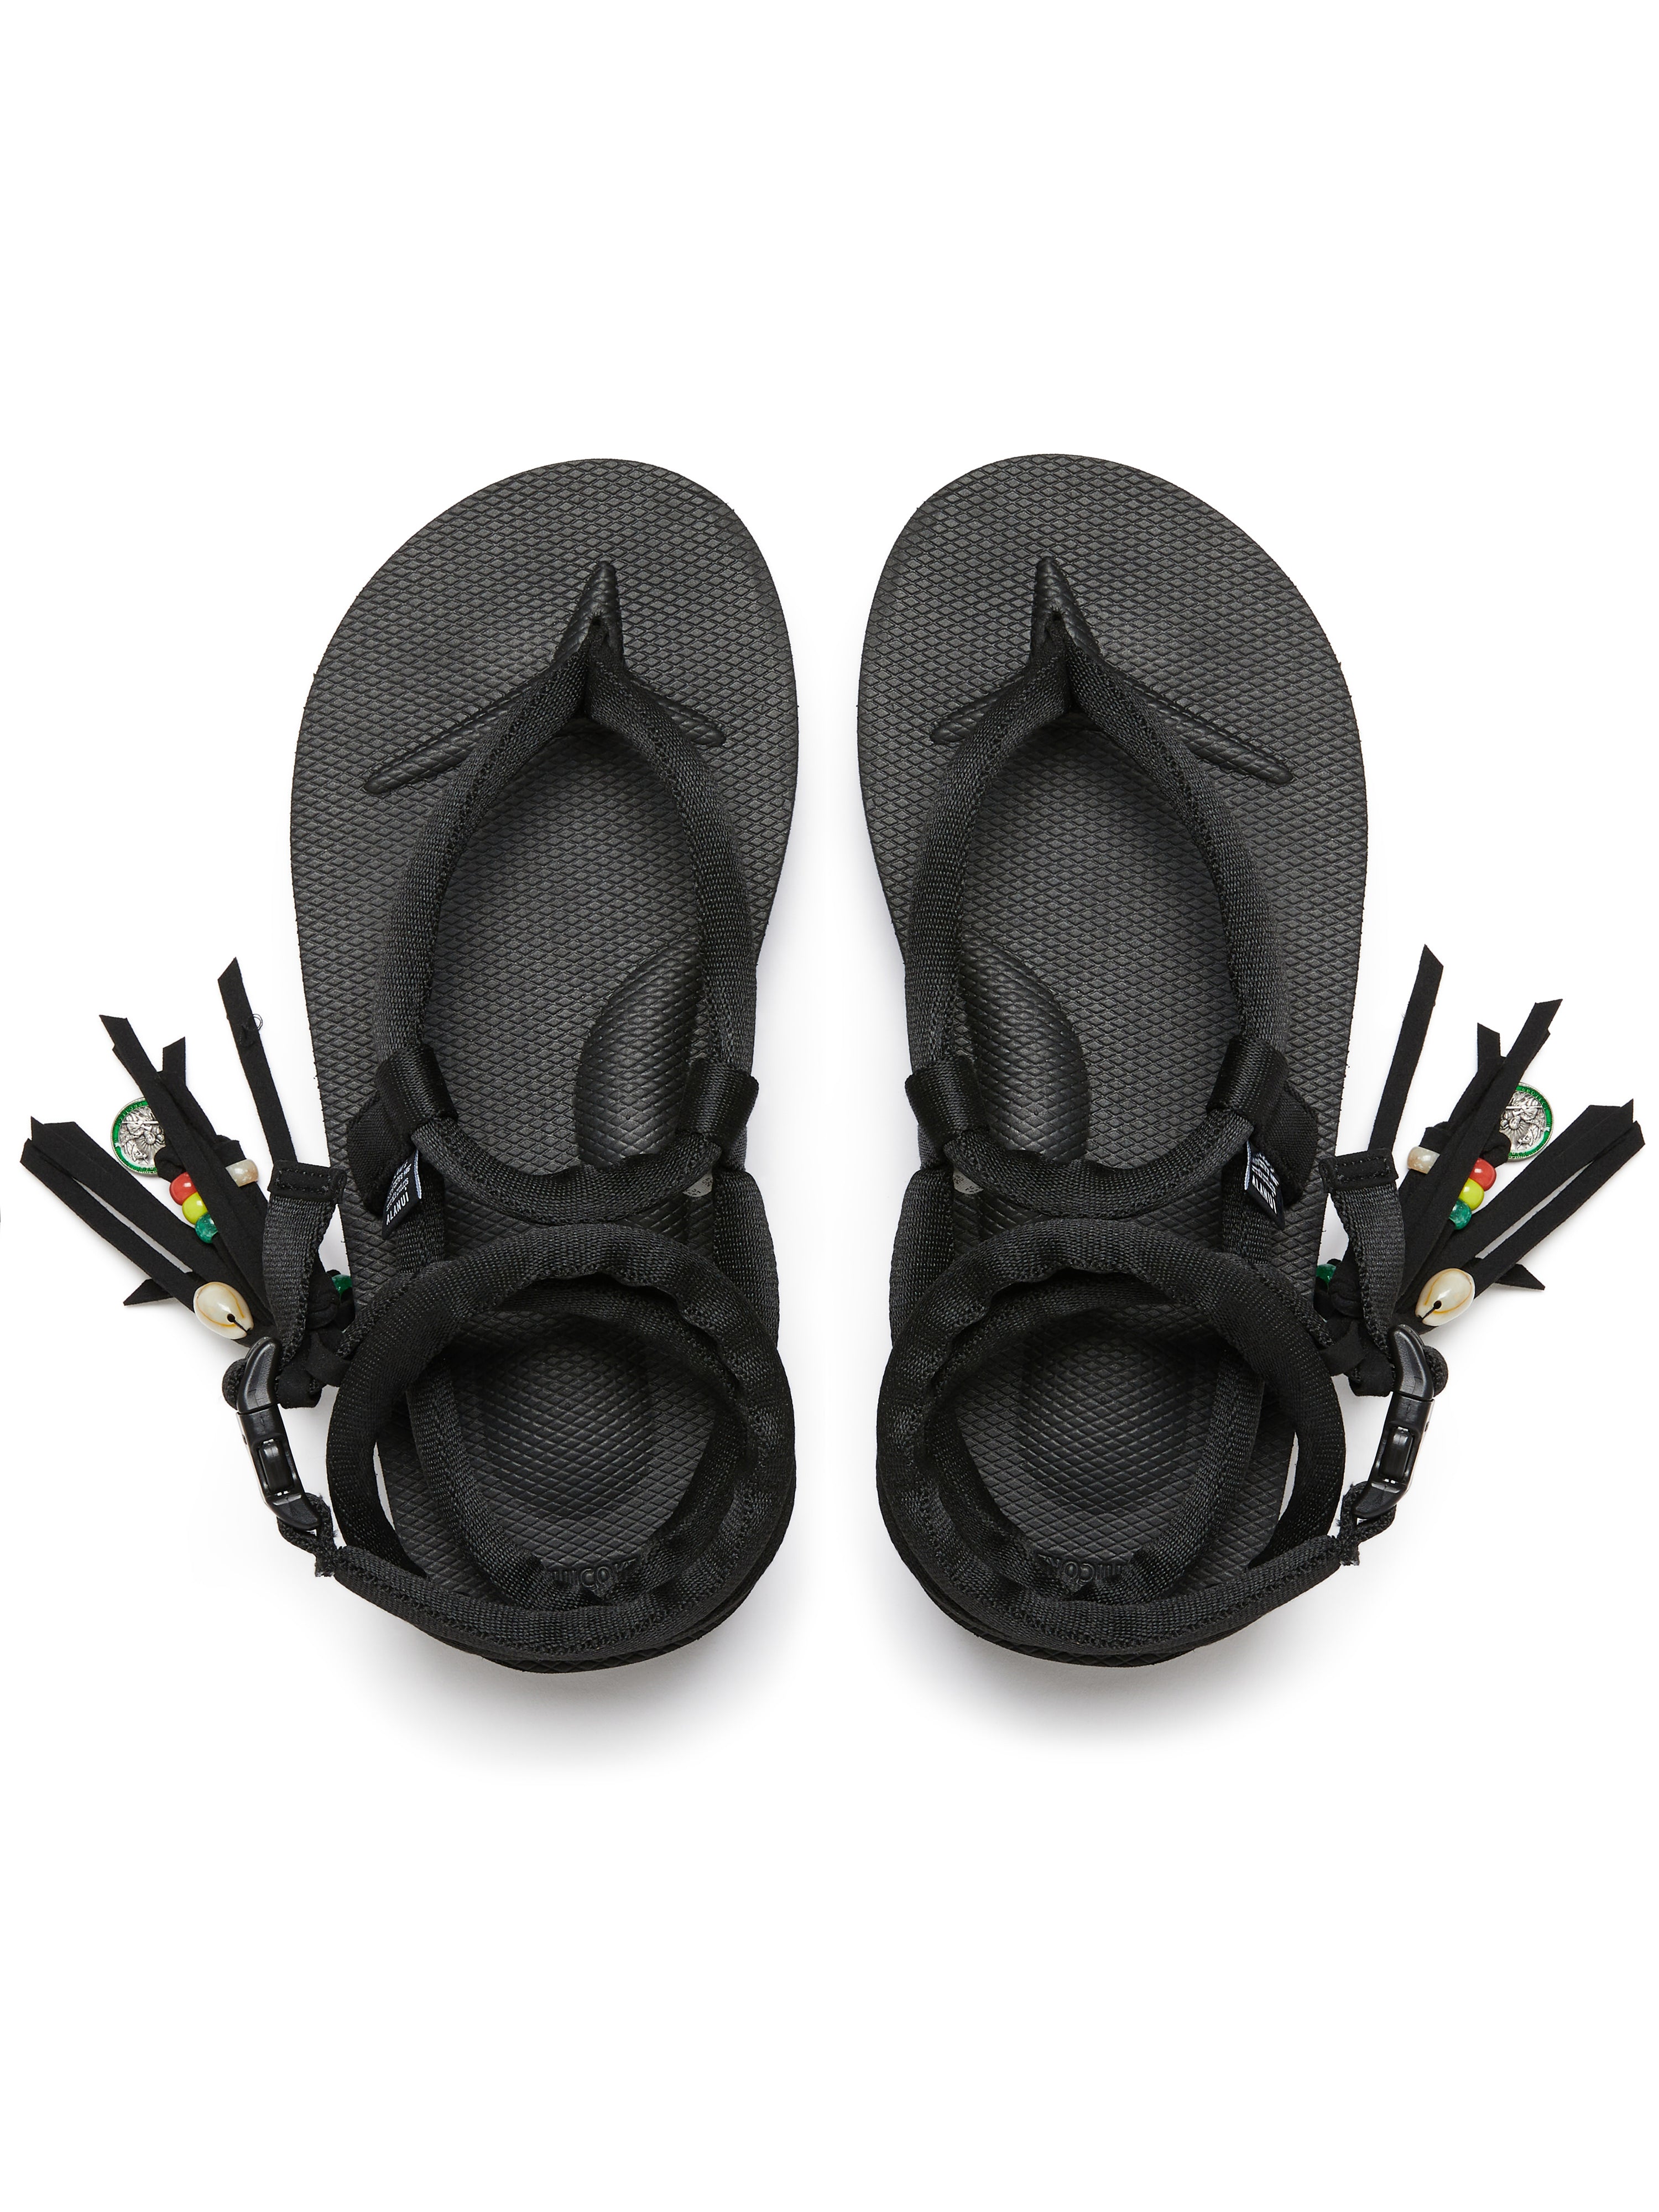 SUICOKE Alanui Edition GUT-HI-ab sandals with Cushioned Nylon Straps w/ Suede Fringe Accents , black midsole and sole. From Spring/Summer 2022 collection on SUICOKE Official US & Canada Webstore.